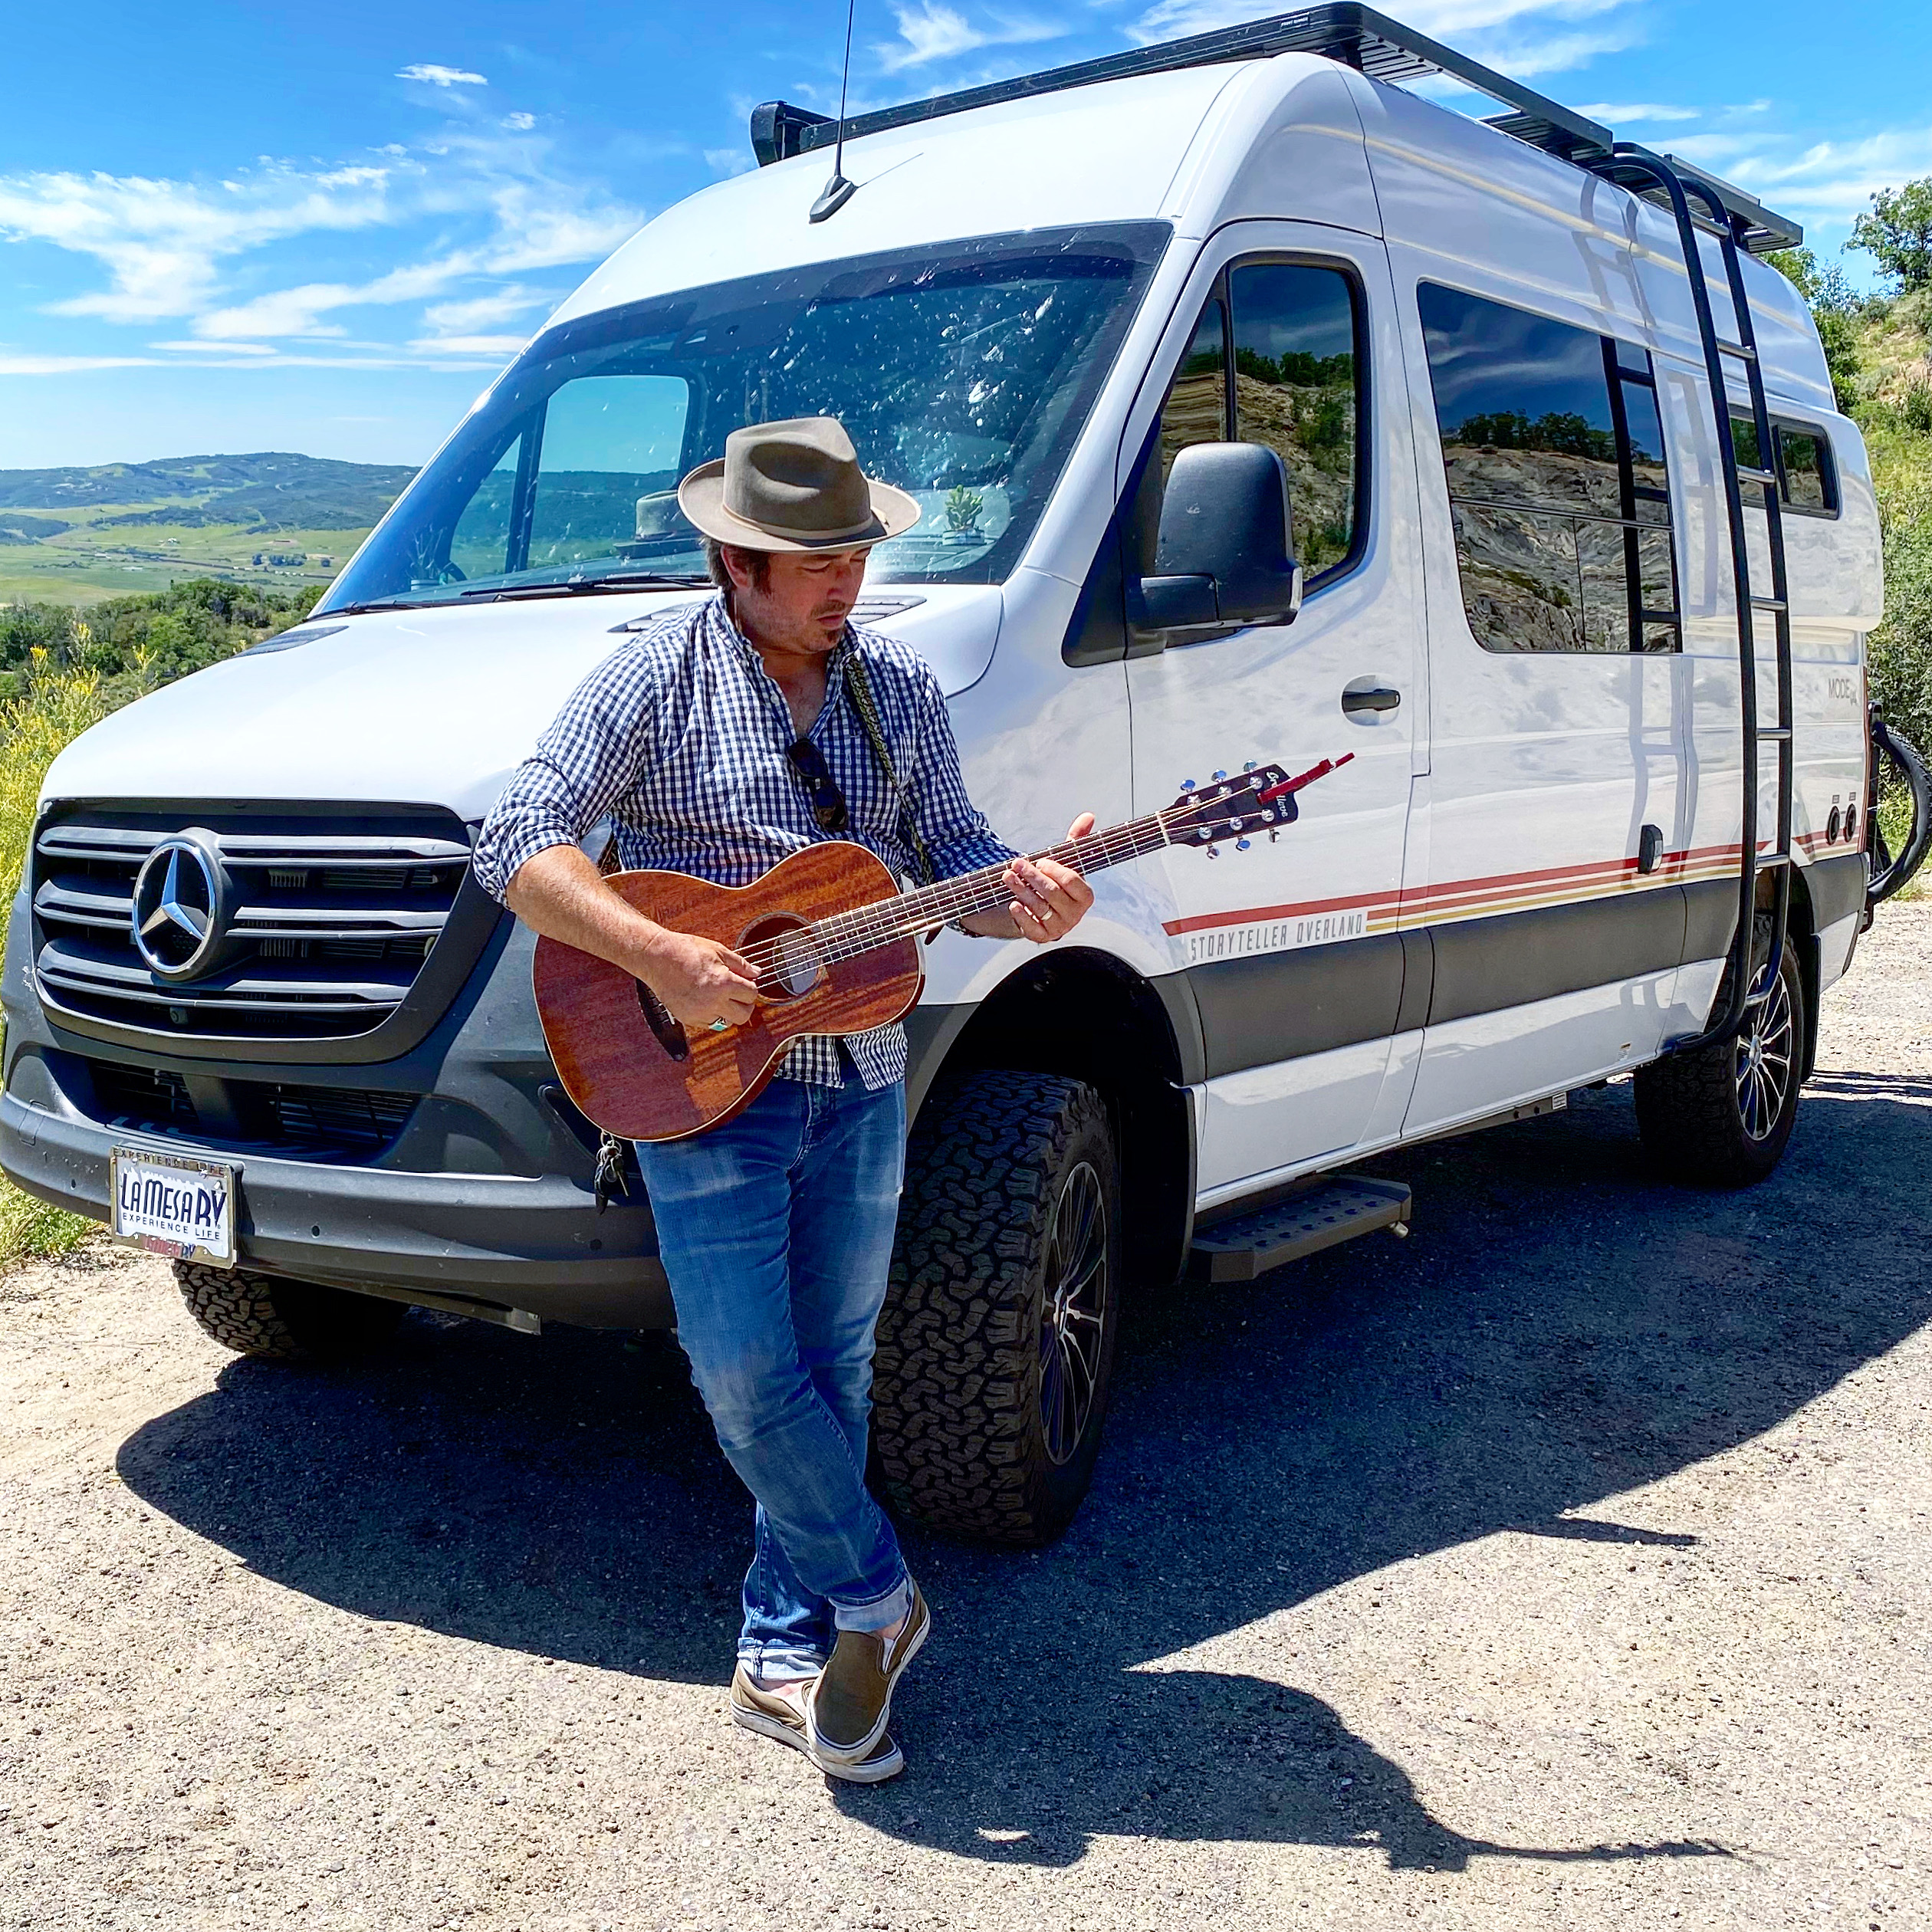 Through a series of outdoor, socially distanced, private shows across the US, Jason and his wife Emma traveled over 38,000 miles, across 32 states in their 2020 Storyteller Overland MODE 4x4 sprinter van, equipped with Volta’s lithium-ion auxiliary power system